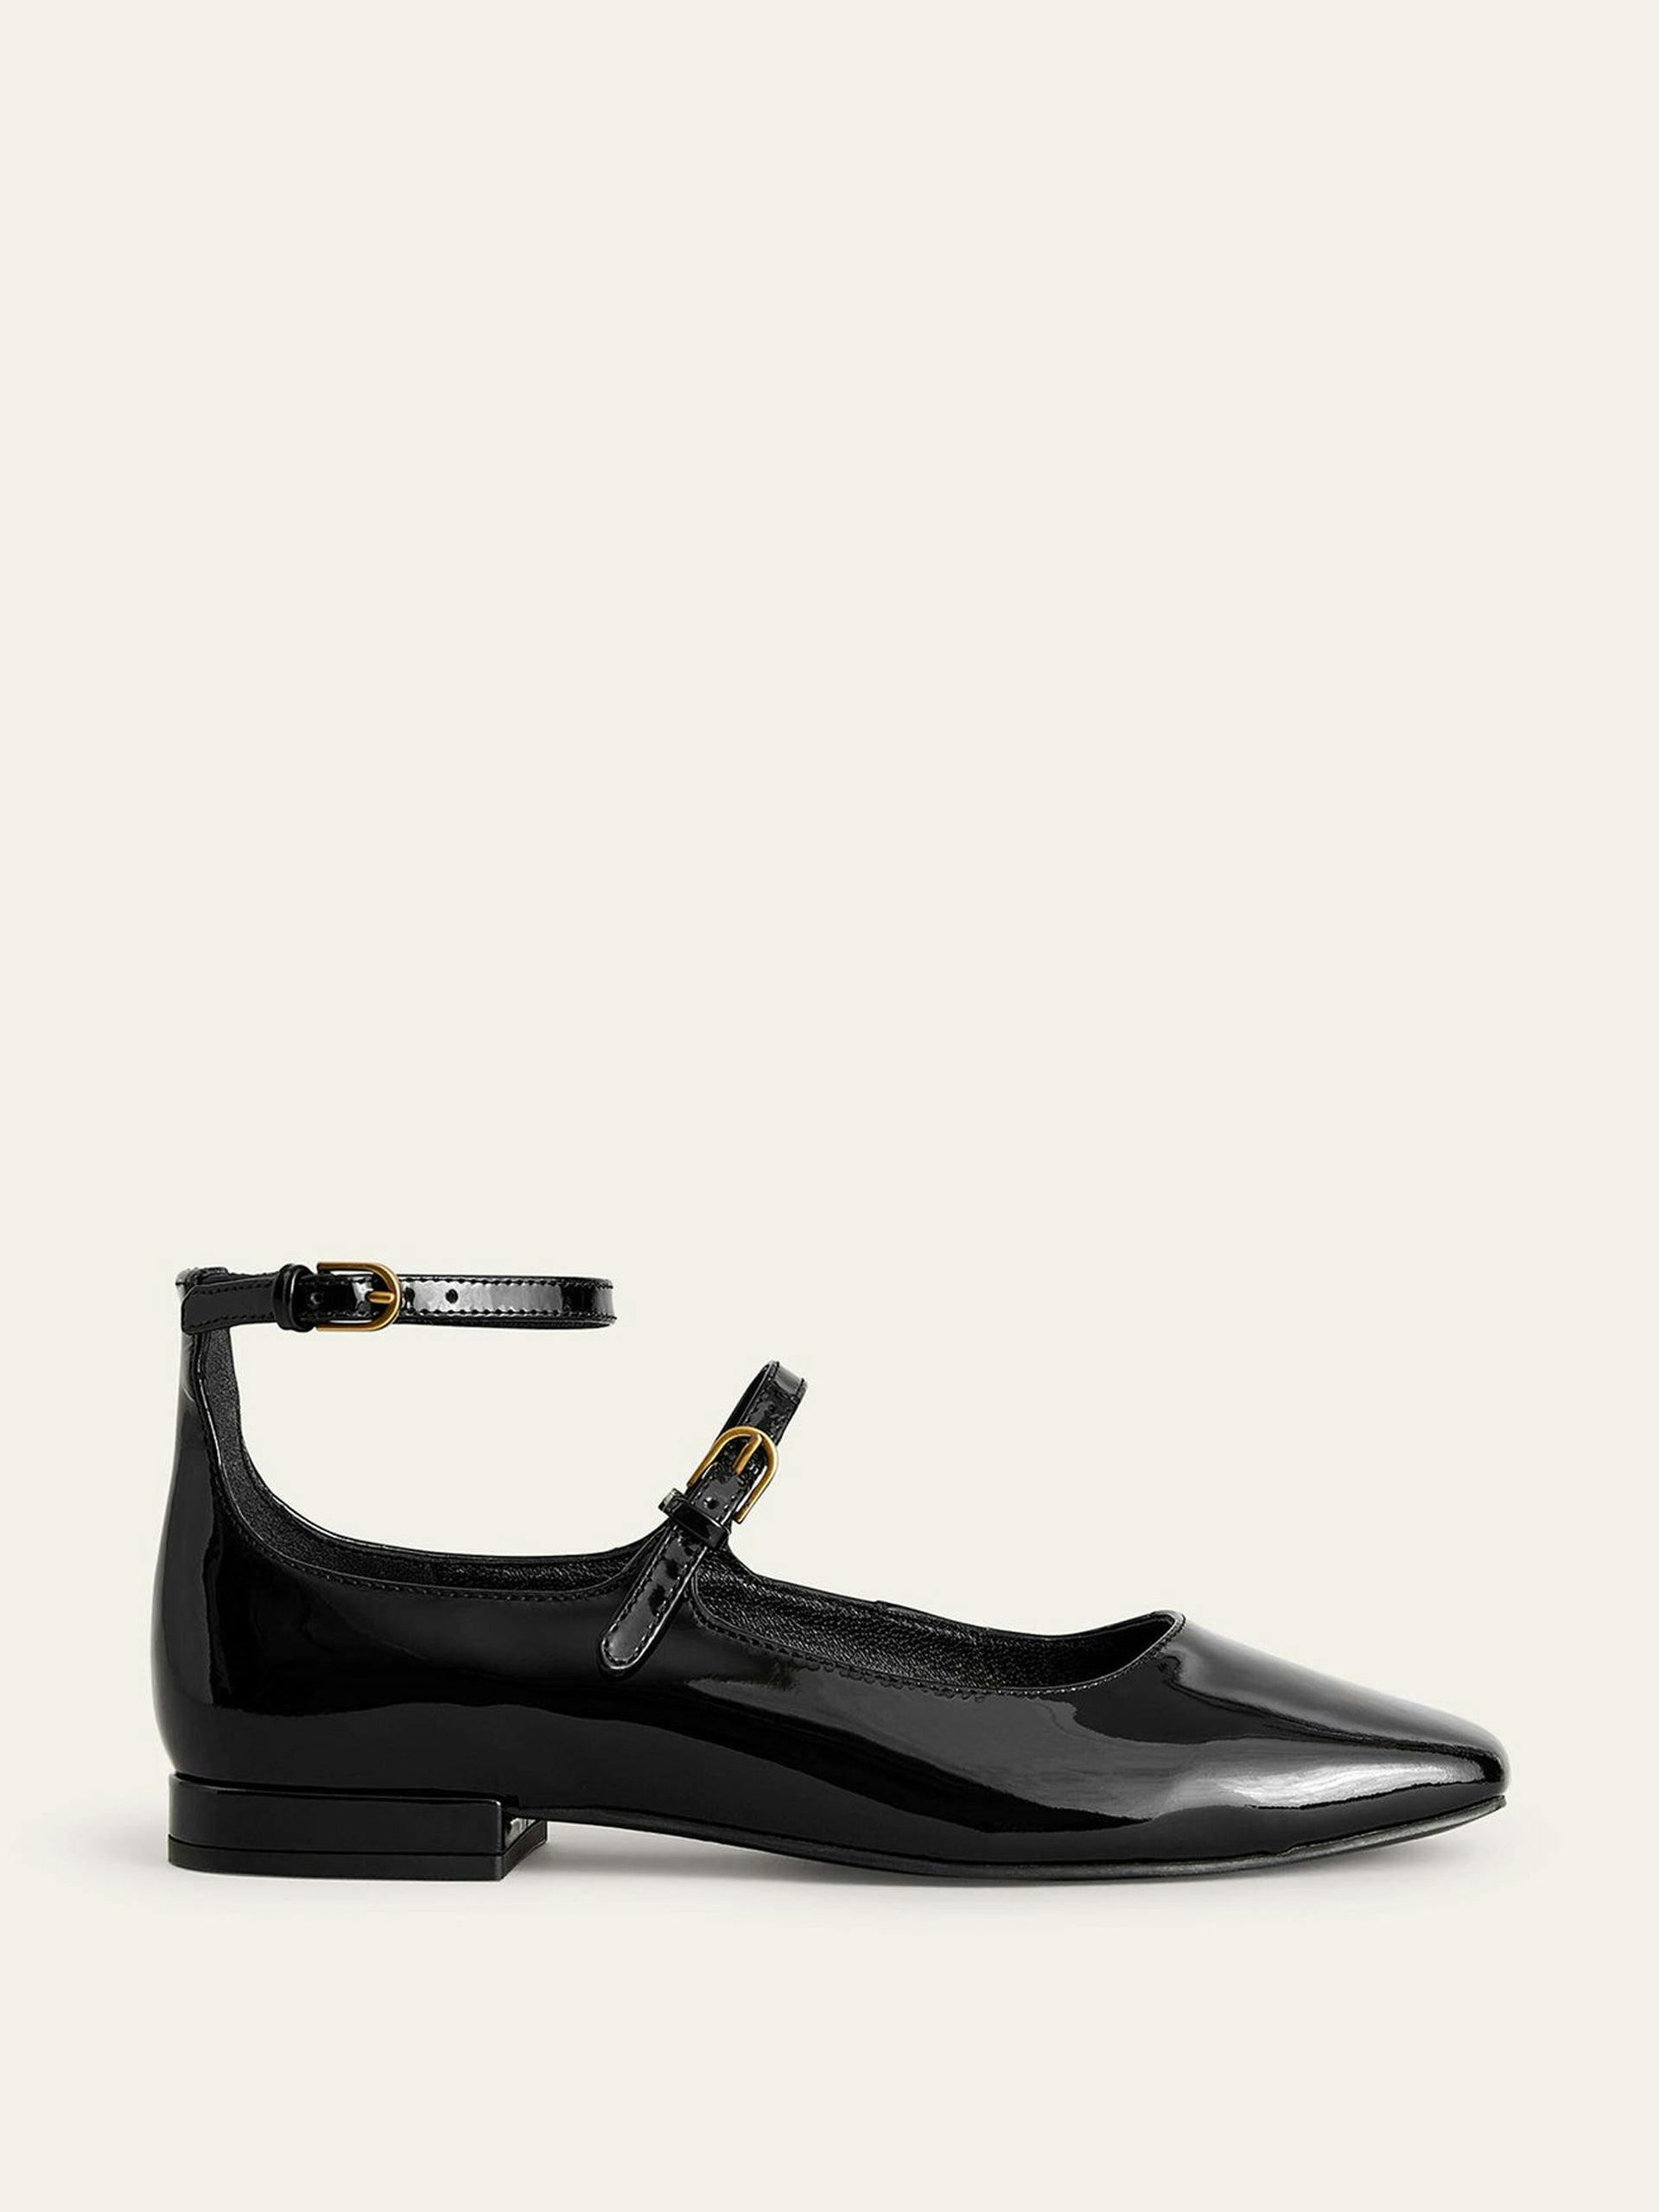 Black patent double strap Mary Jane shoes